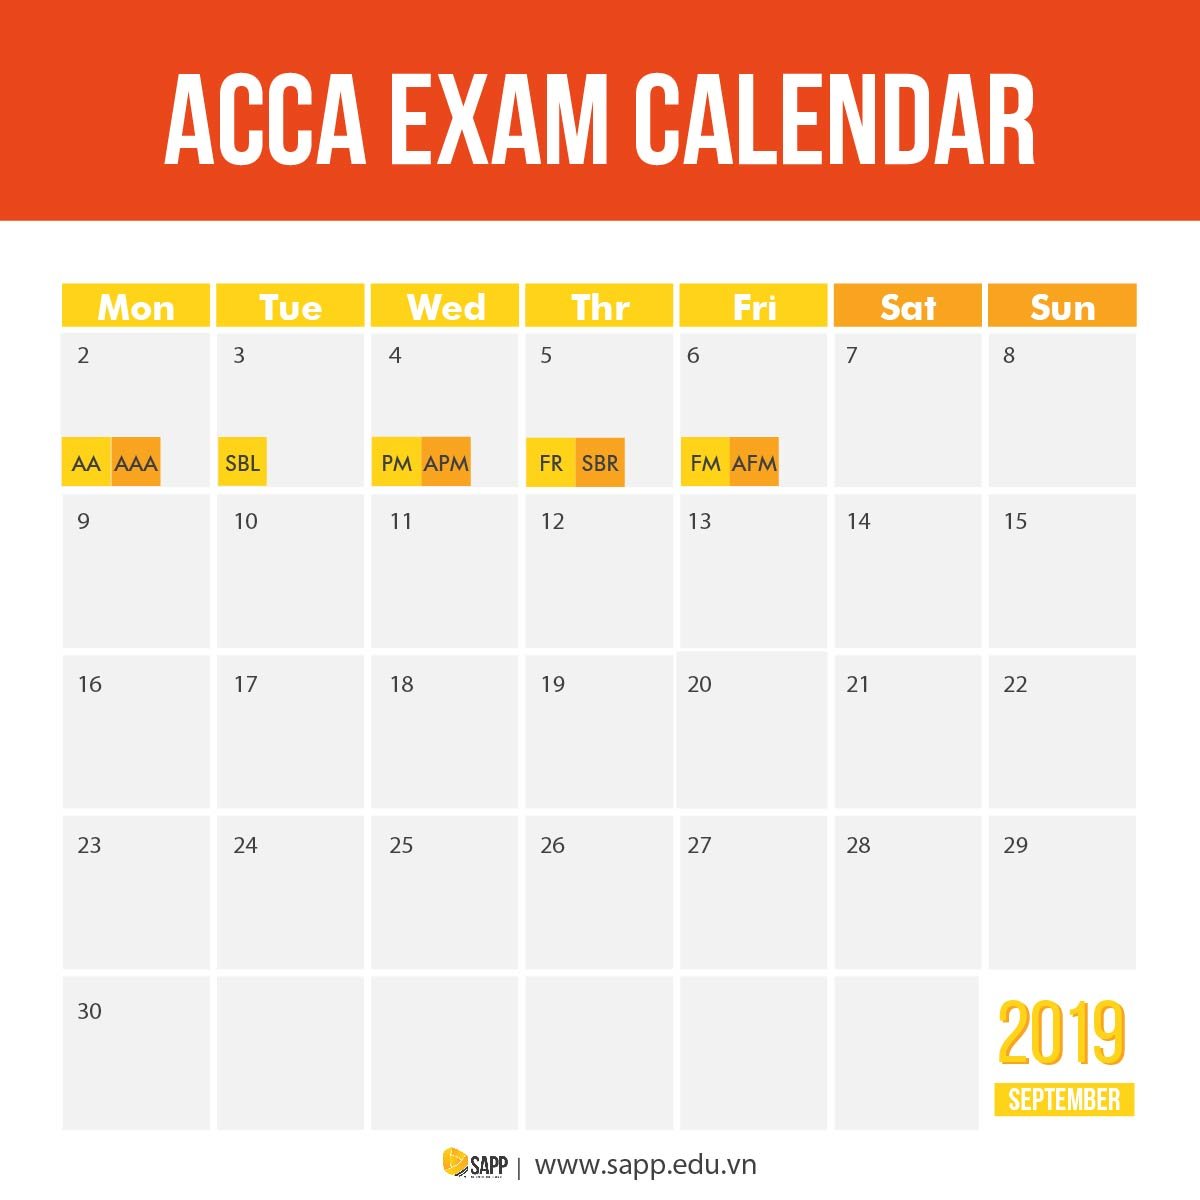 Phuong_Lich_thi_ACCA_Sep2019-01-01